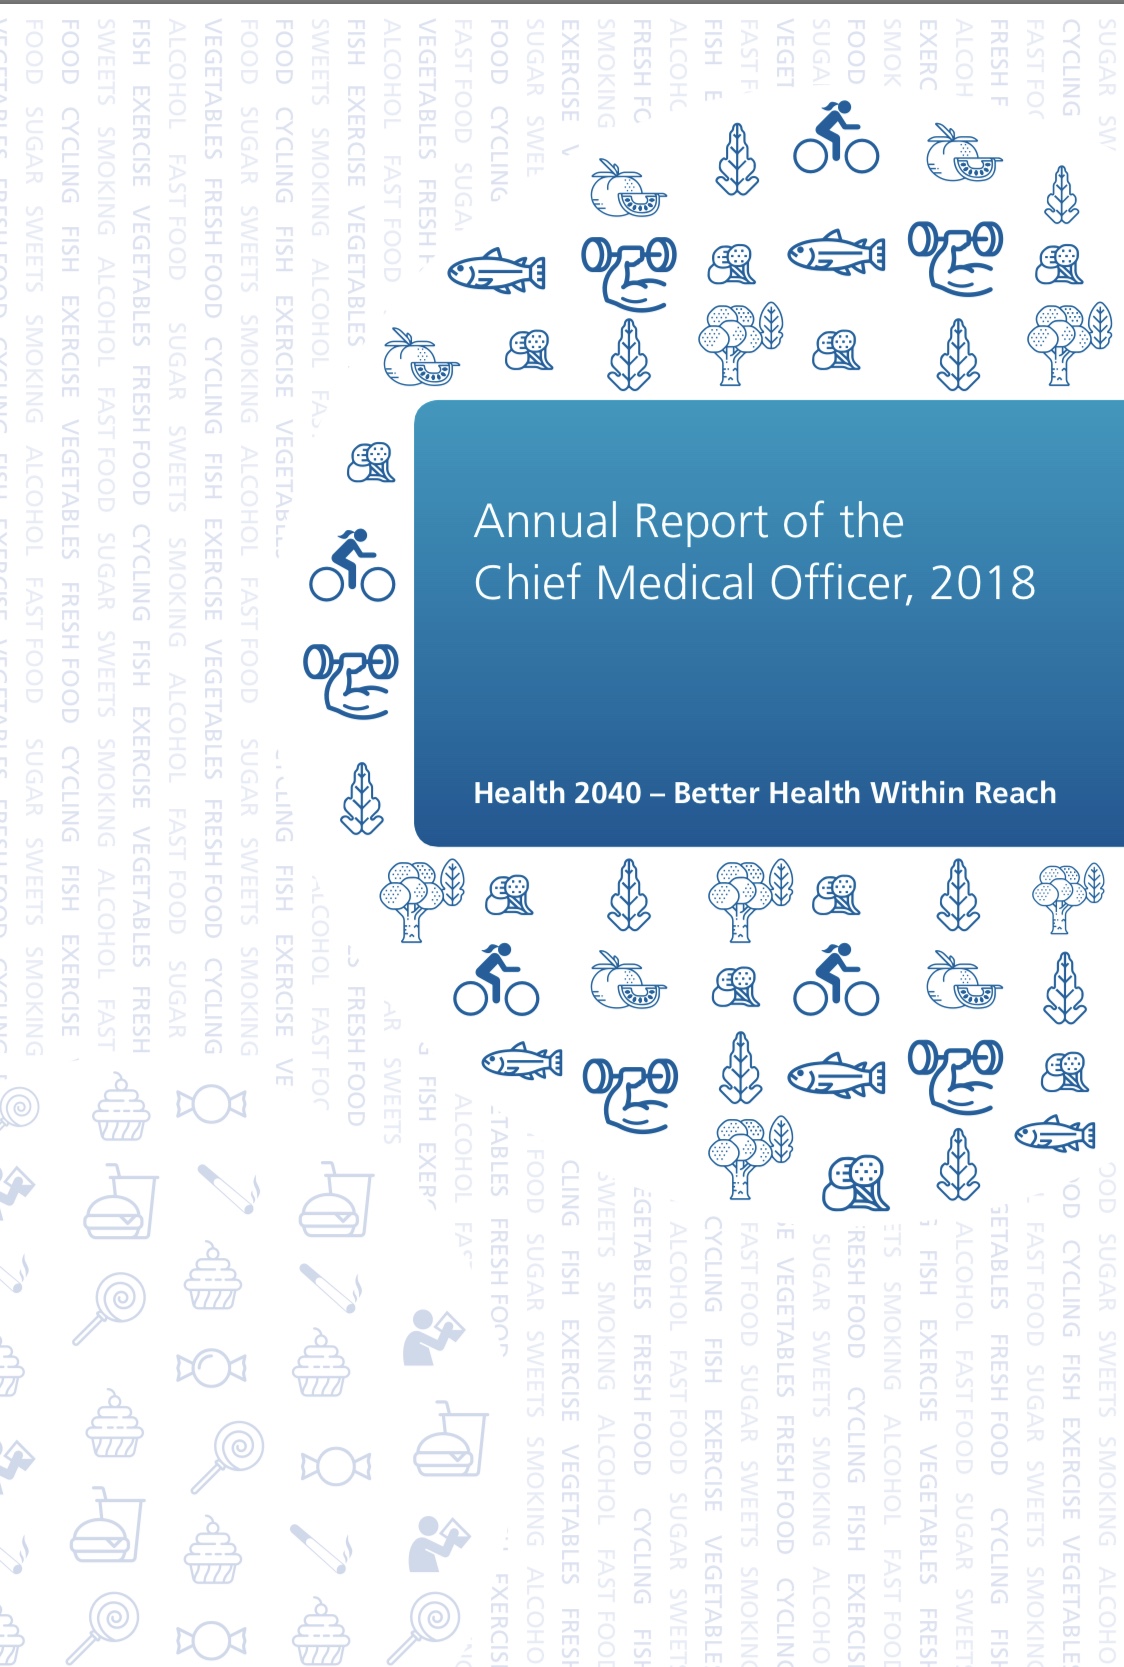 CMO'S Annual Report 2018   2040- Better Health Within Reach featured image